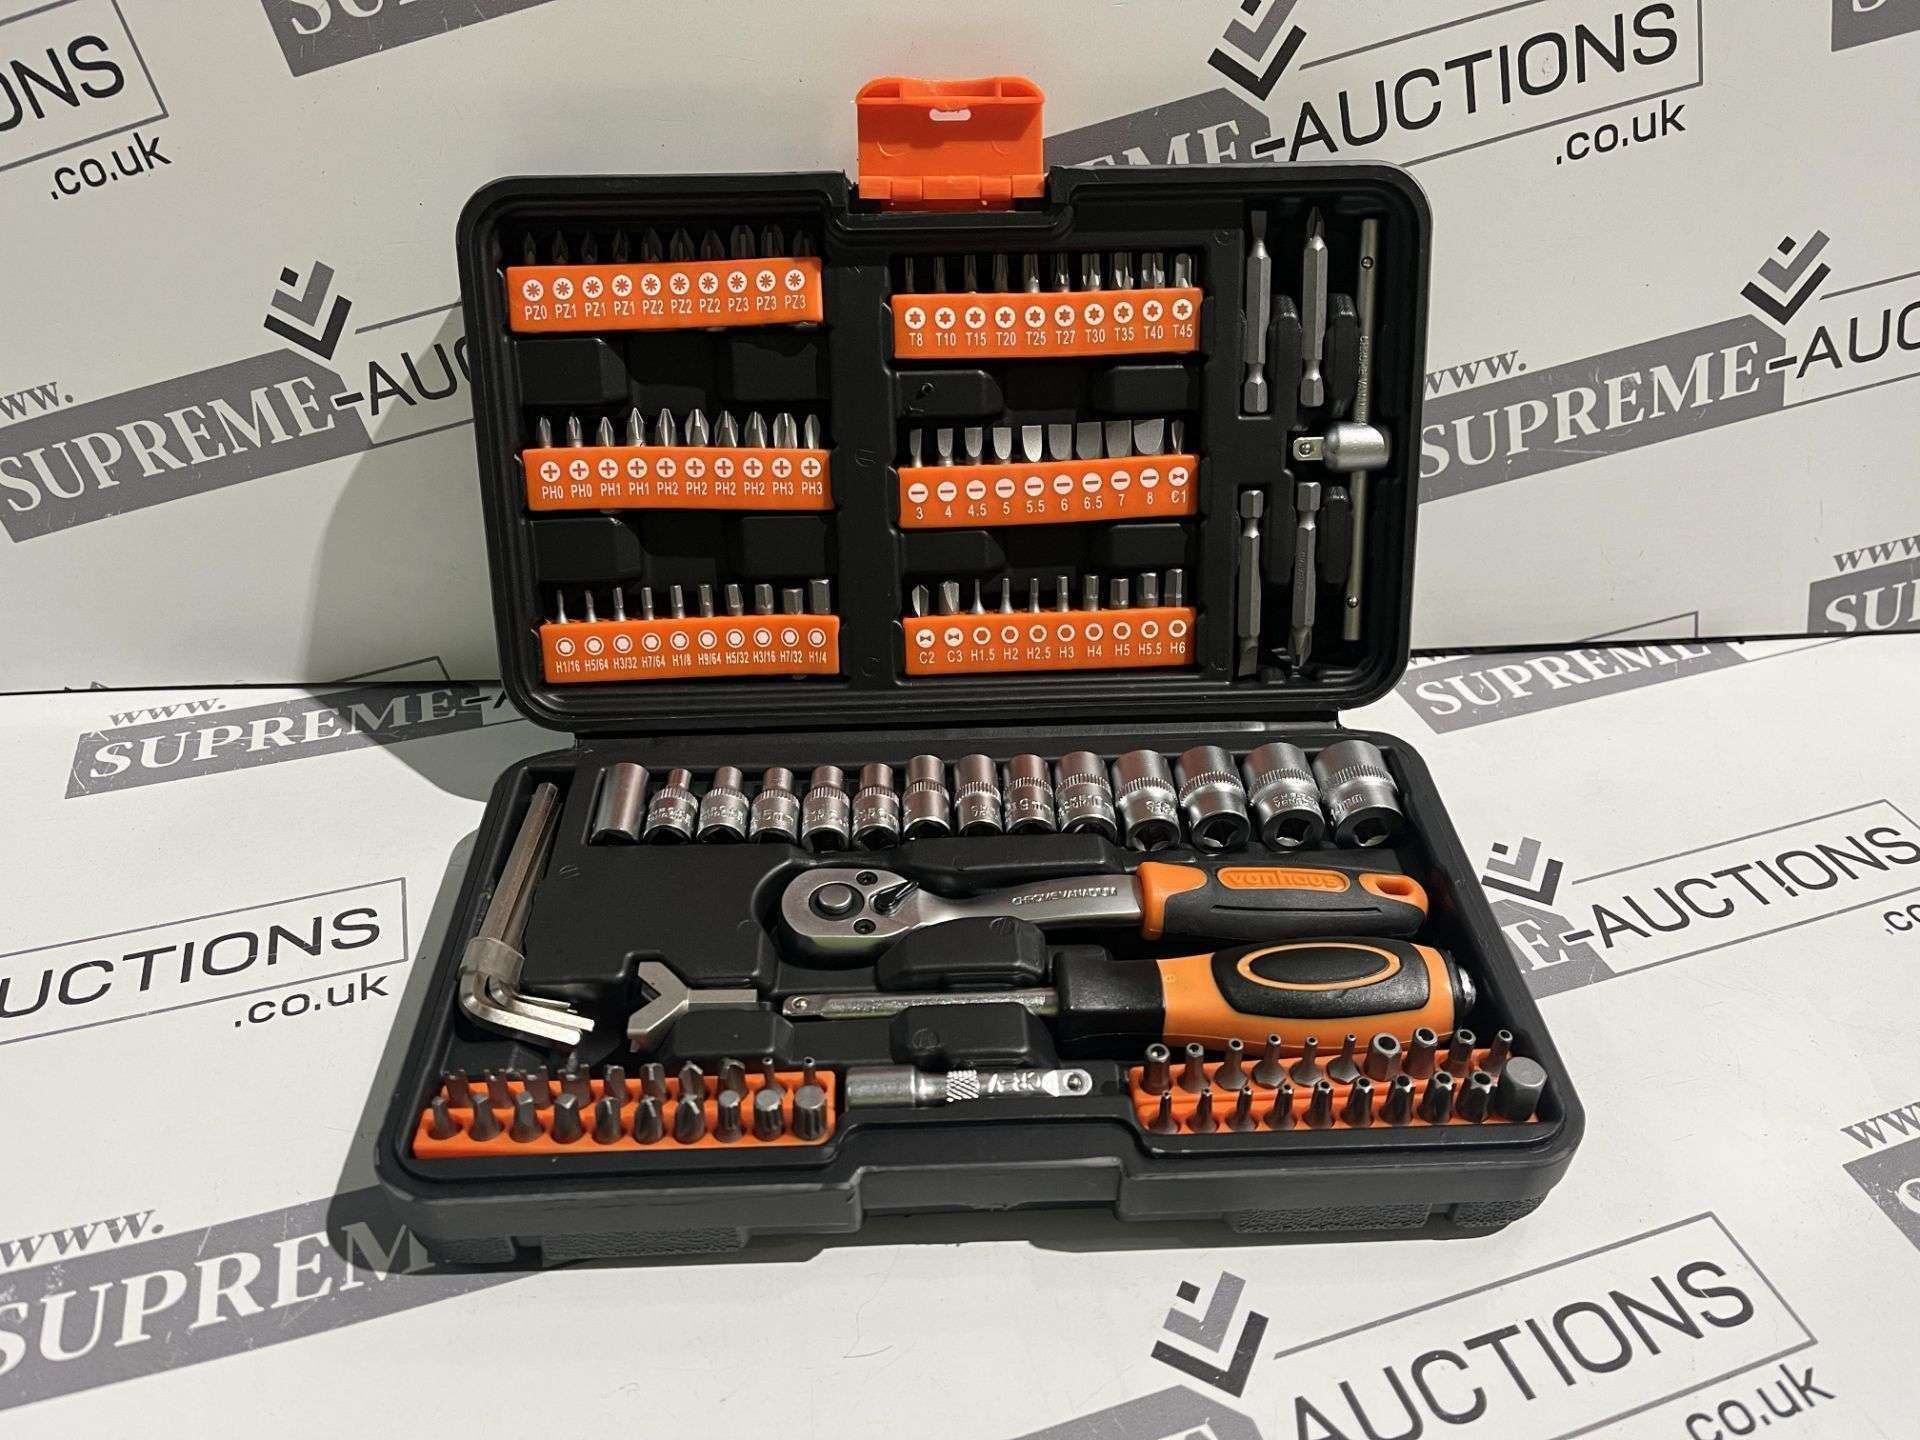 TRADE LOT 10 x BRAND NEW 130 PIECE SOCKET & BIT TOOL SETS. (R18.10). Be prepared for the